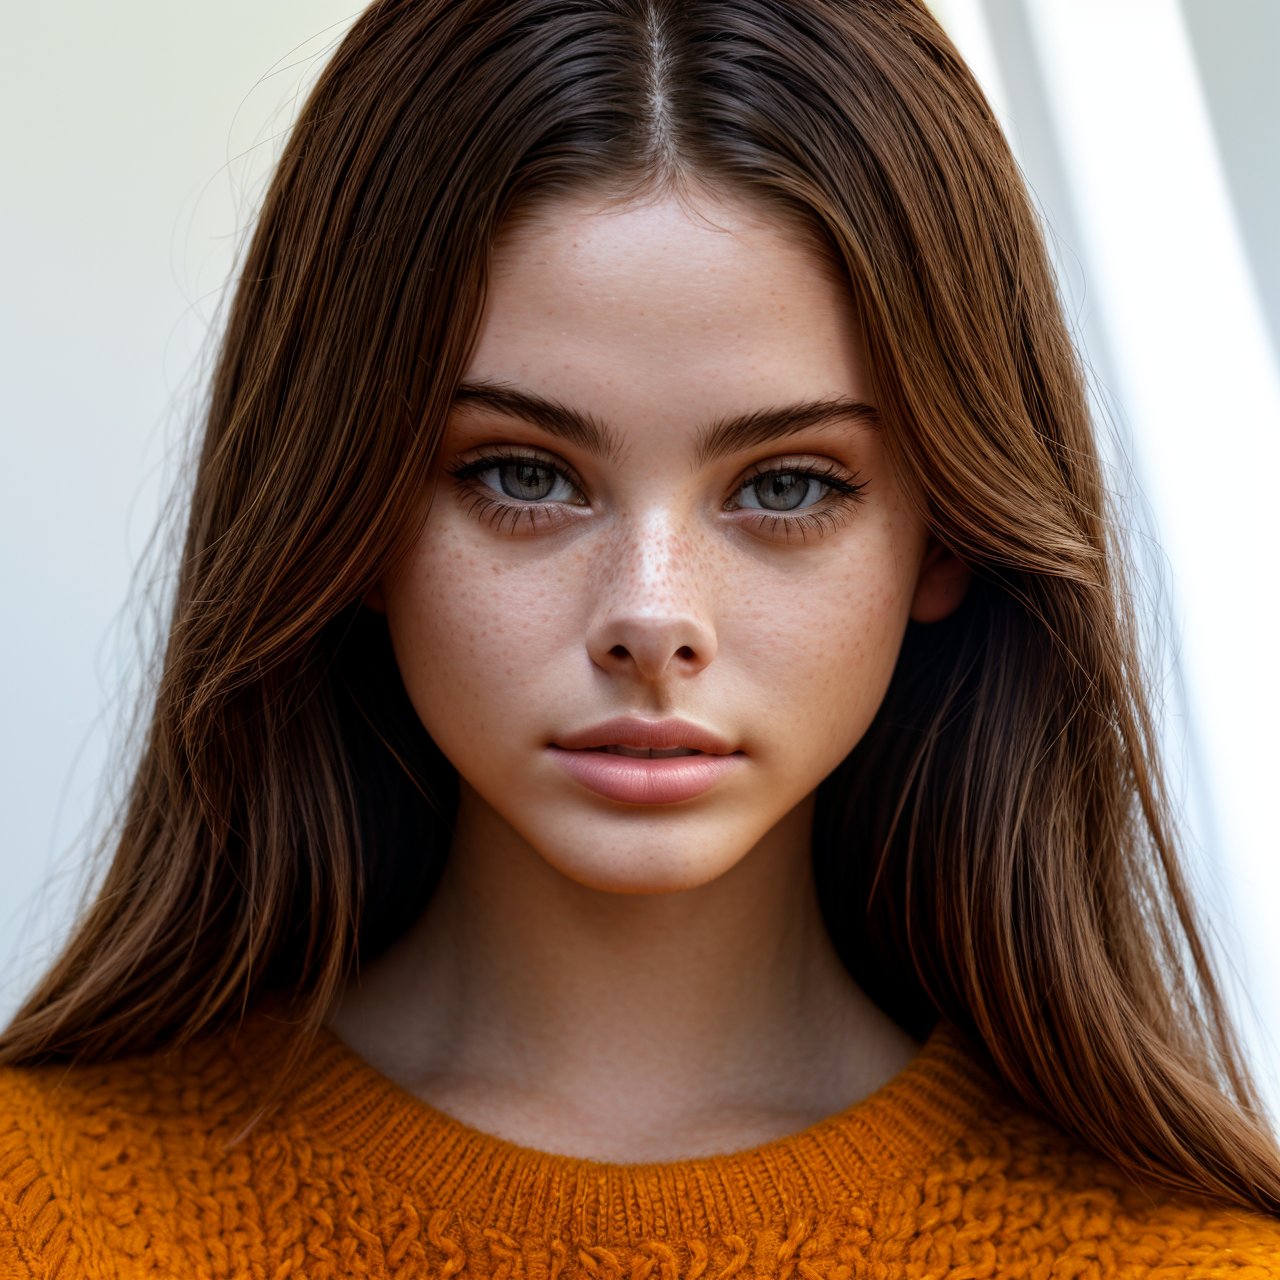 best quality, extra resolution, wallpaper view from above, portrait of cute (AIDA_LoRA_MeW2023:1.07) <lora:AIDA_LoRA_MeW2023:0.97> in (simple yellow sweater:1.1), [stunning woman], pretty face, naughty, funny, happy, playful, cinematic, composition, kkw-ph1, (colorful:1.1), (studio photo:1.1), (simple white background:1.1)